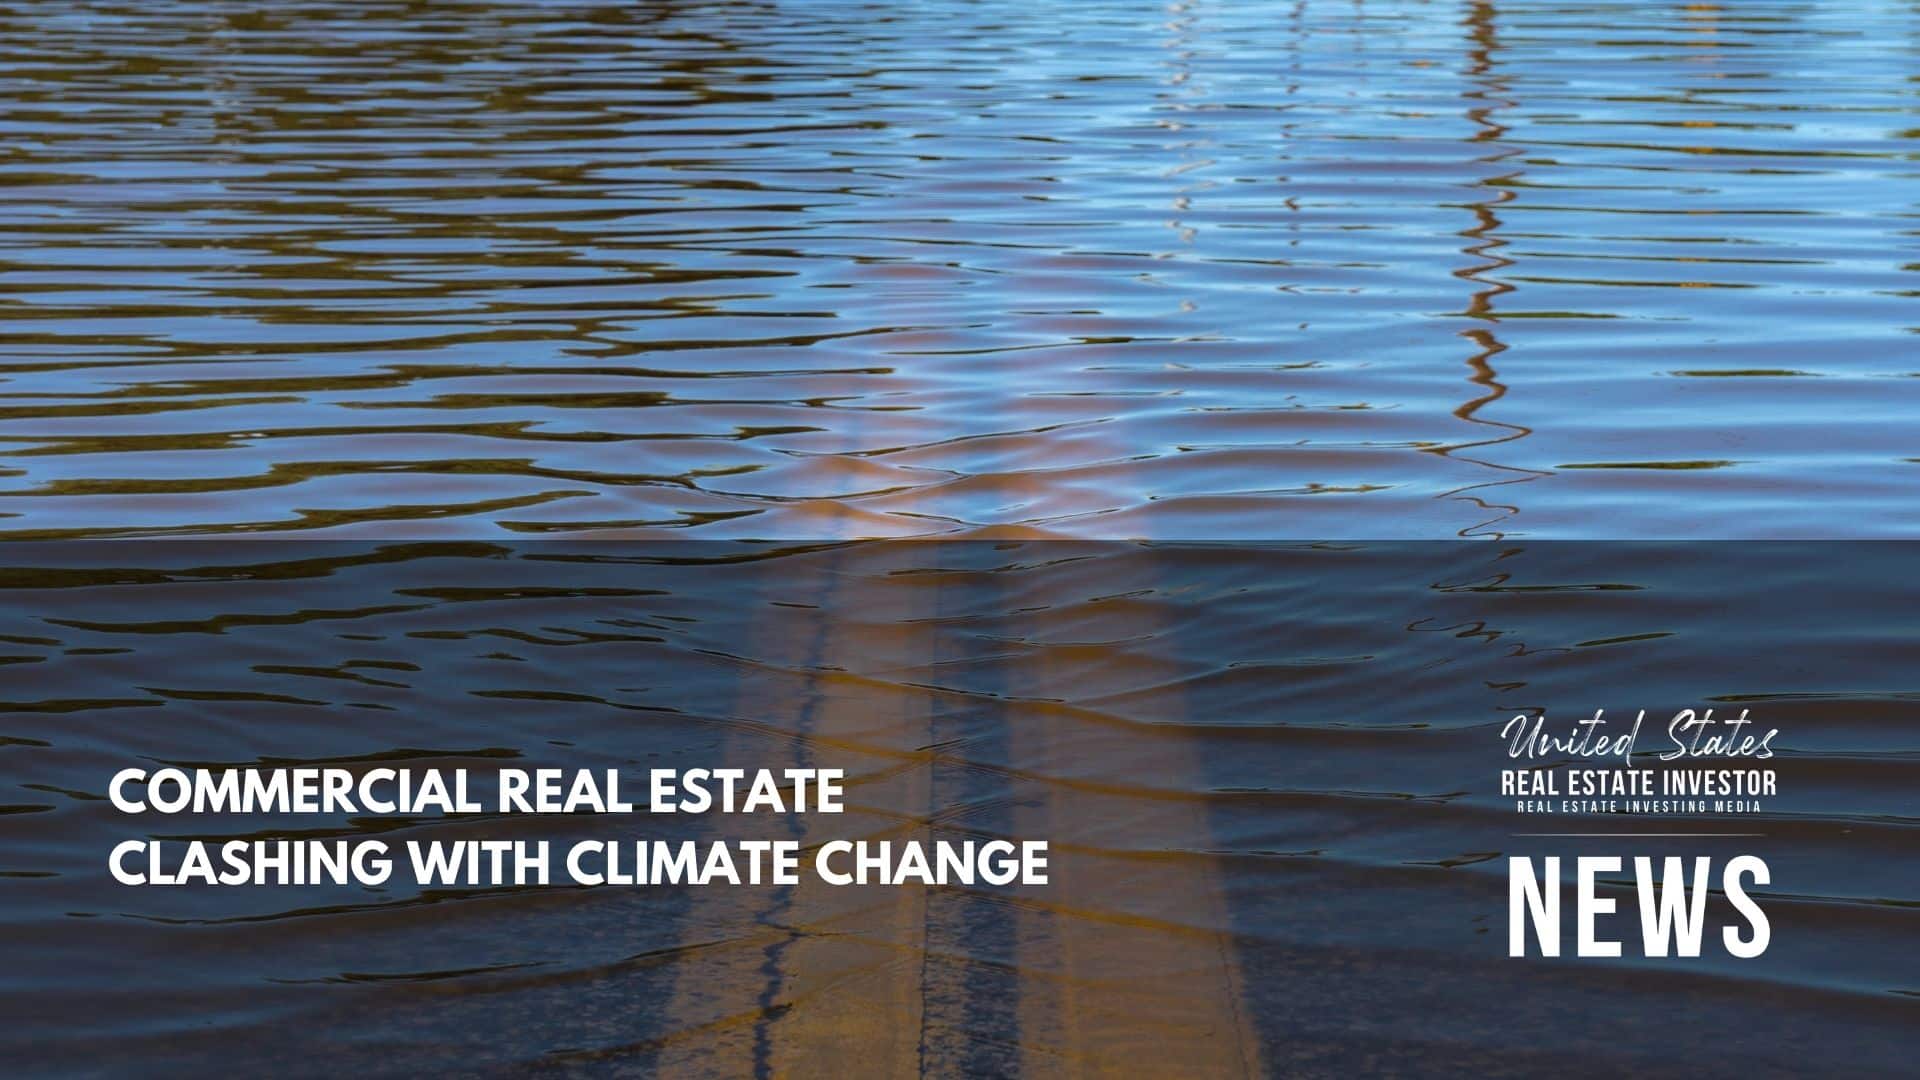 United States Real Estate Investor - Real estate investing media - Commercial Real Estate Clashing With Climate Change